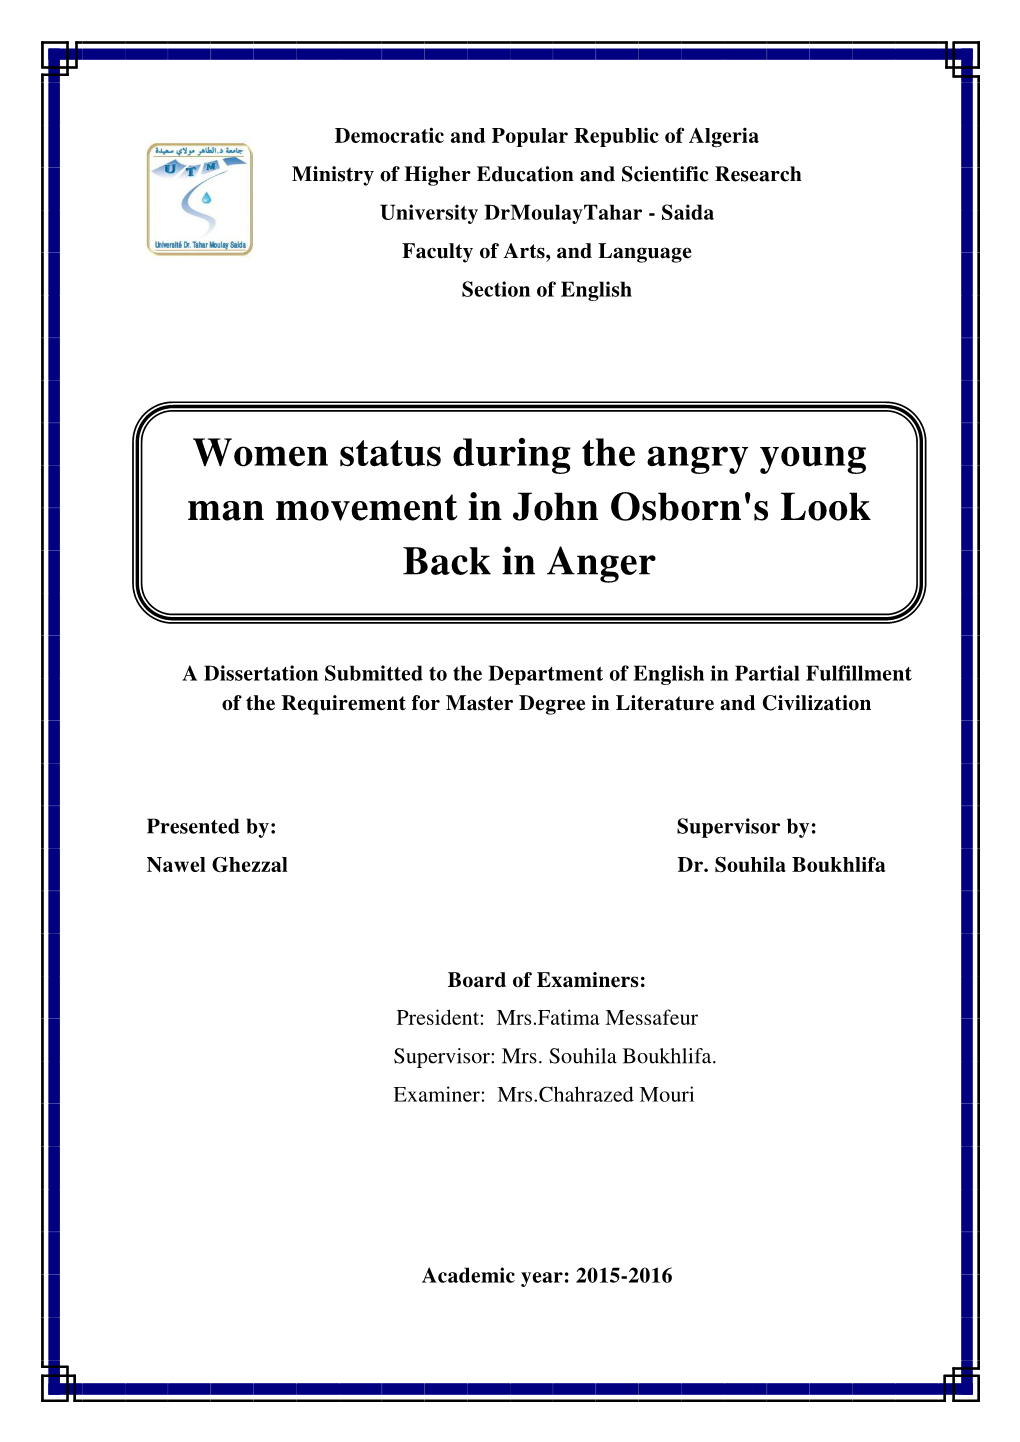 Women Status During the Angry Young Man Movement in John Osborn's Look Back in Anger